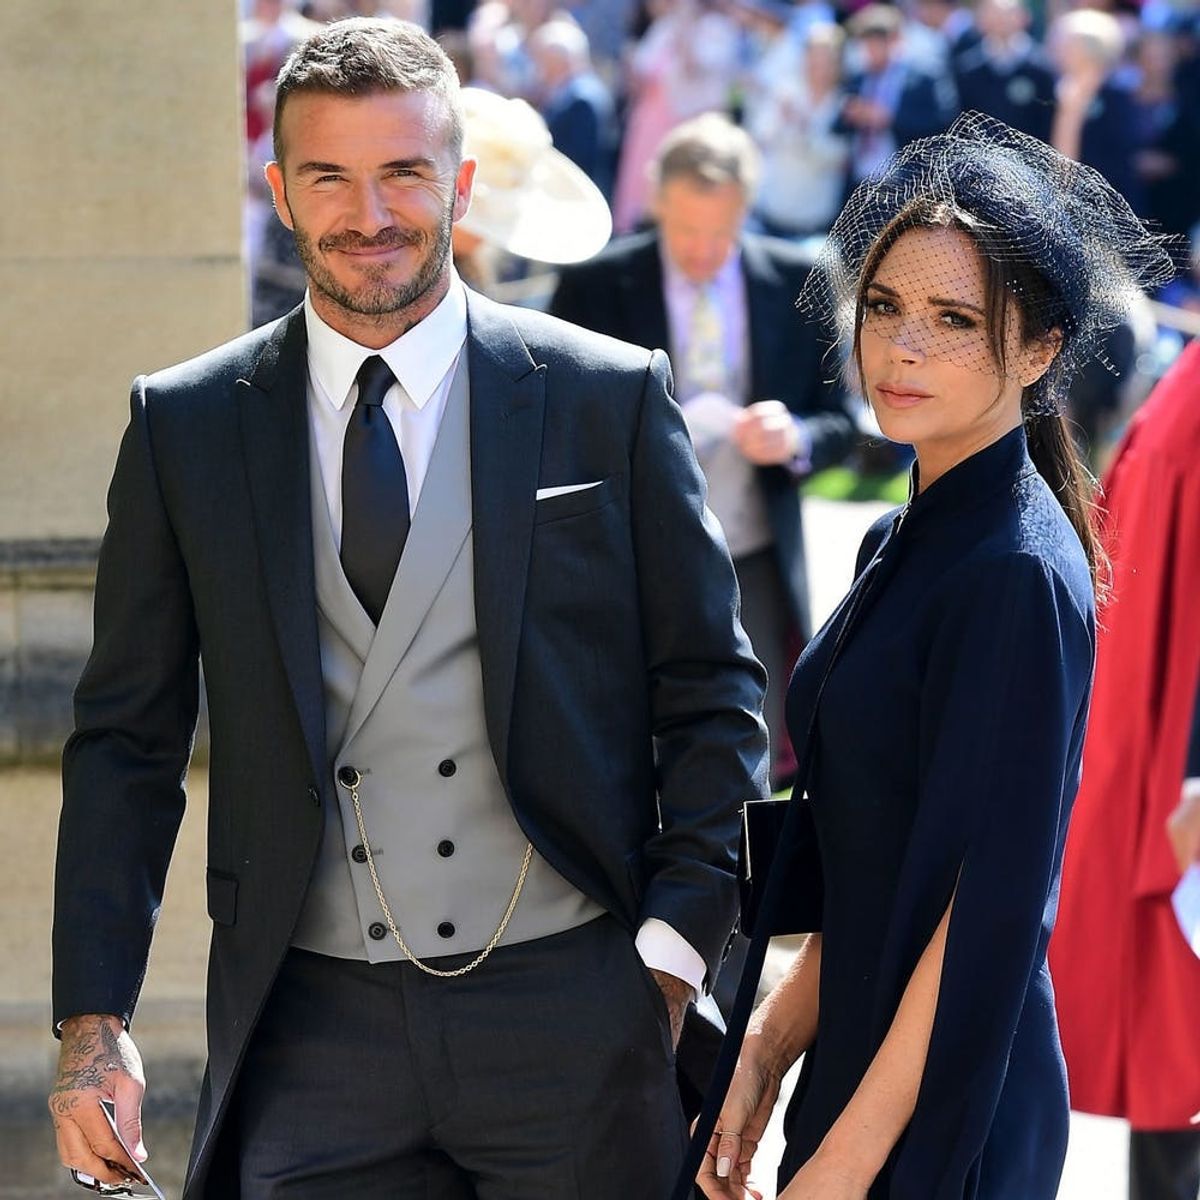 David and Victoria Beckham Had Some Sweet Words for Each Other on Their 19th Anniversary